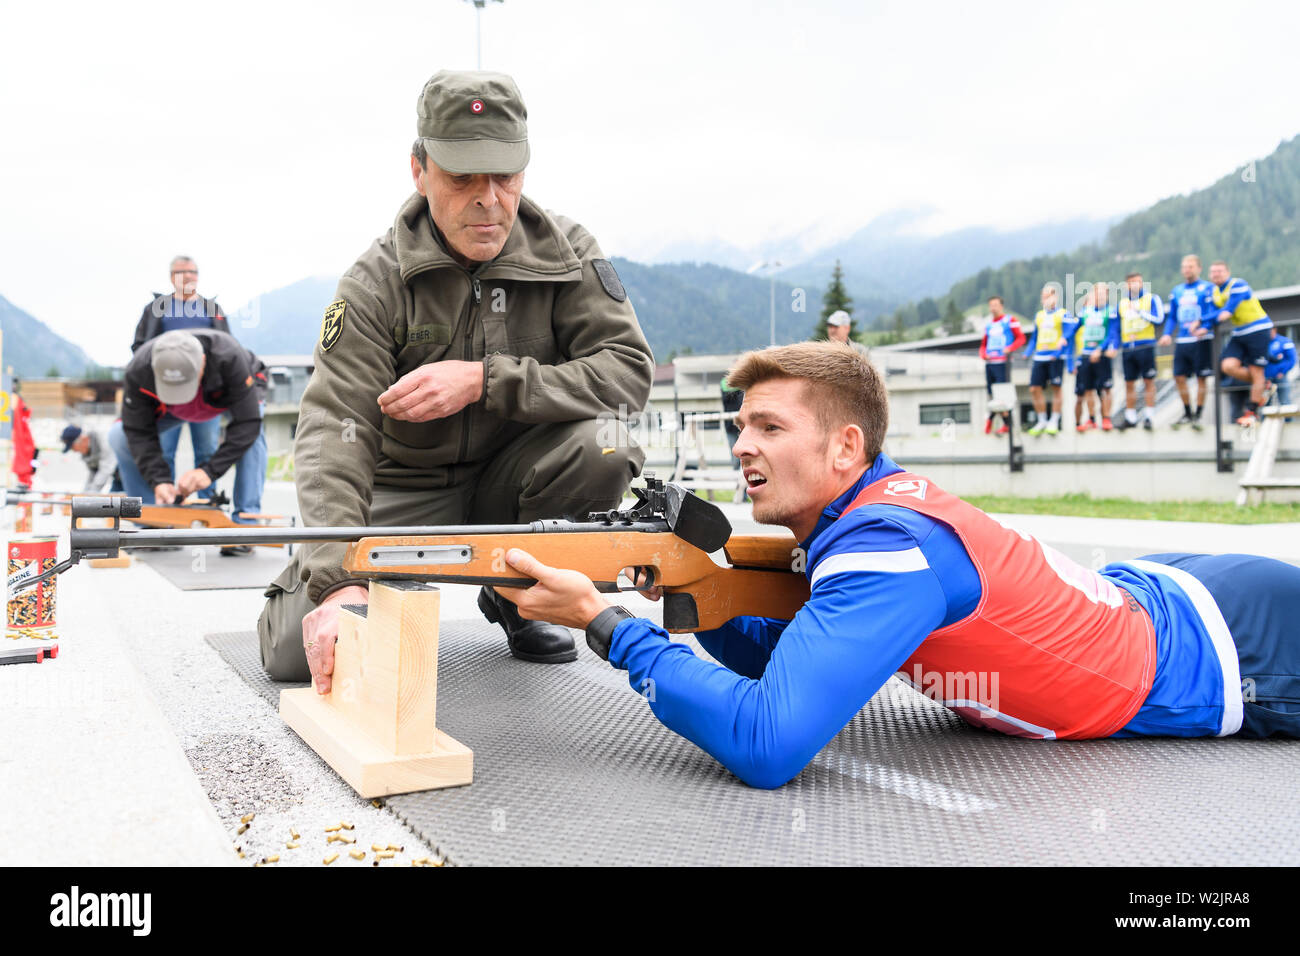 Teambuilding at afterwithtag in biathlon stadium. Marvin Wanitzek (KSC) at the shooting range. GES/football/2nd Bundesliga: training camp of the Karlsruhe Sports Club in Waidring, 07/09/2019 Football/Soccer: 2nd League: training camp Karlsruher SC, Waidring, Austria, July 9, 2019 | usage worldwide Stock Photo